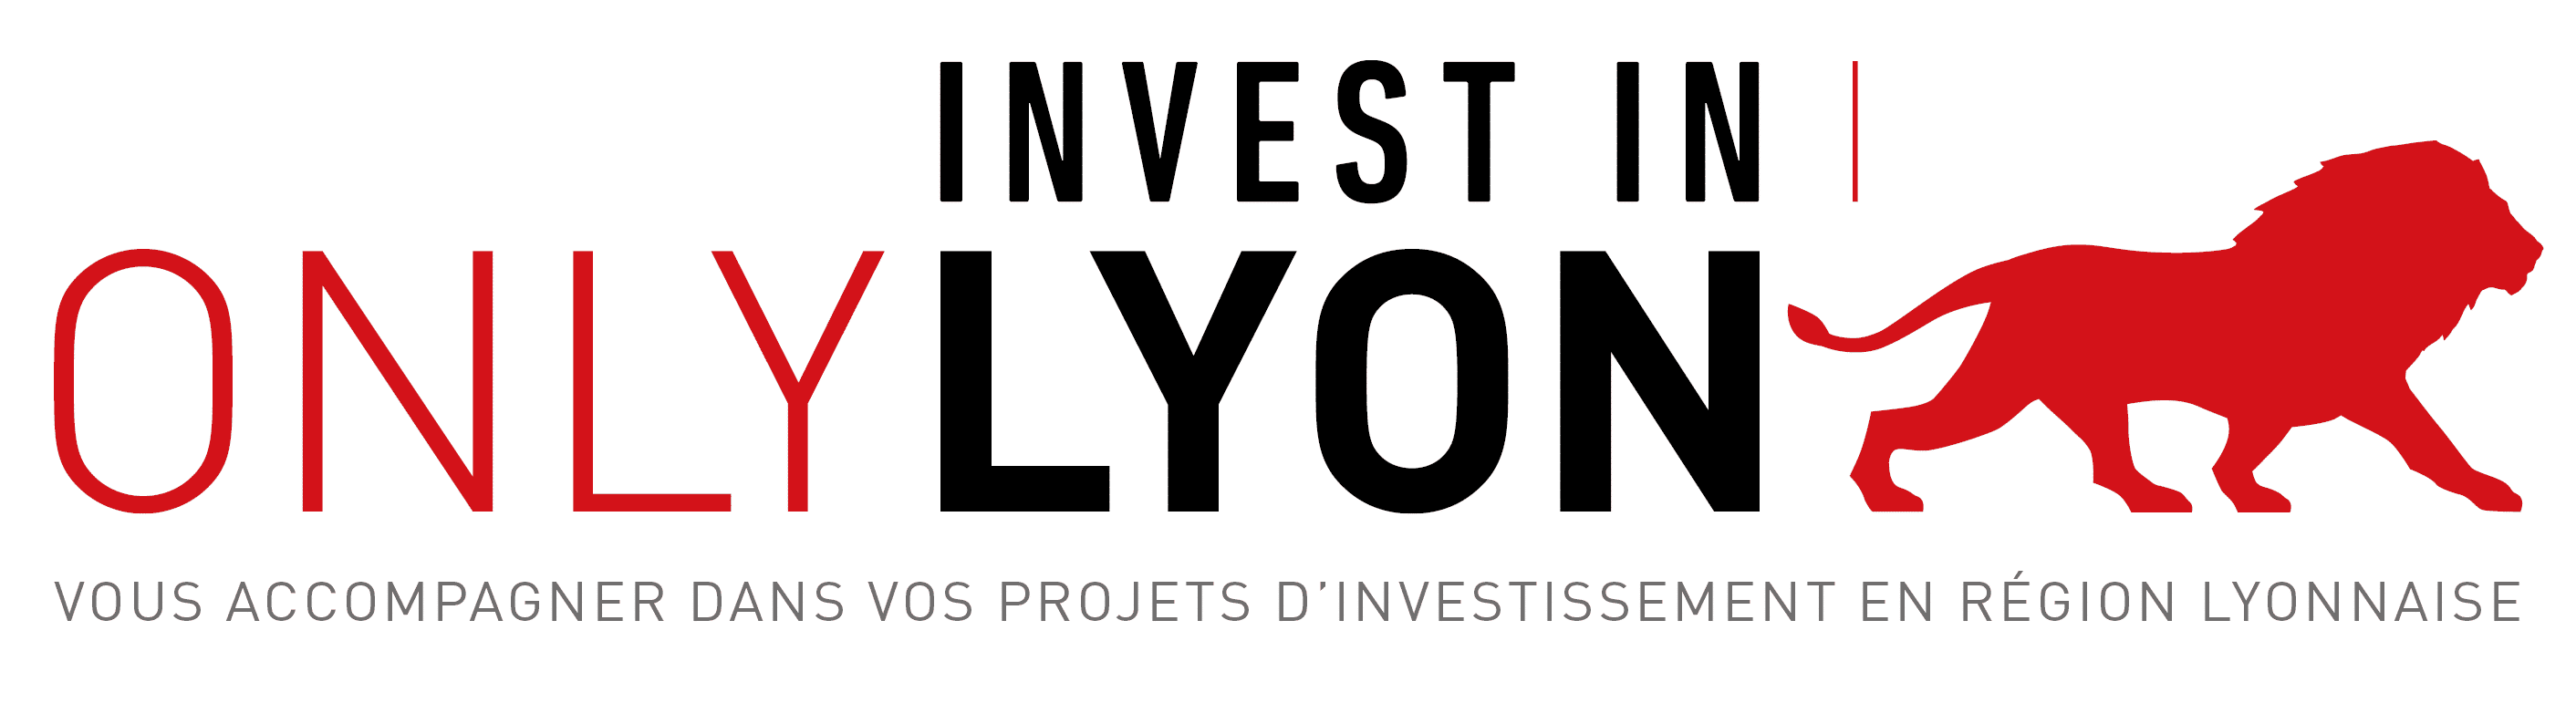 logo invest in only lyon